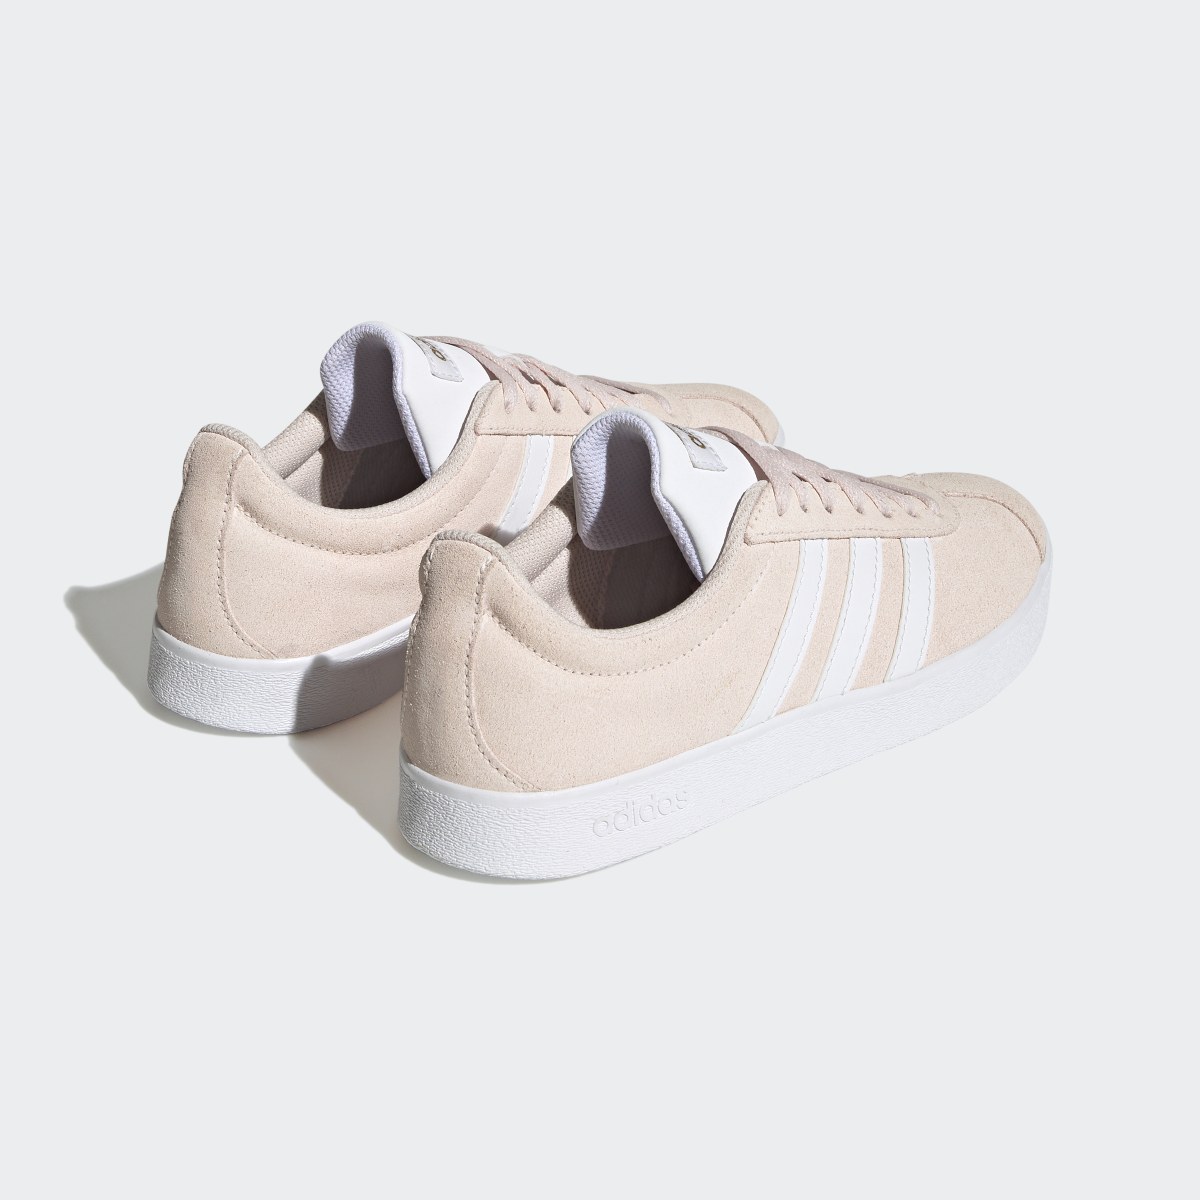 Adidas VL Court 2.0 Suede Shoes. 6